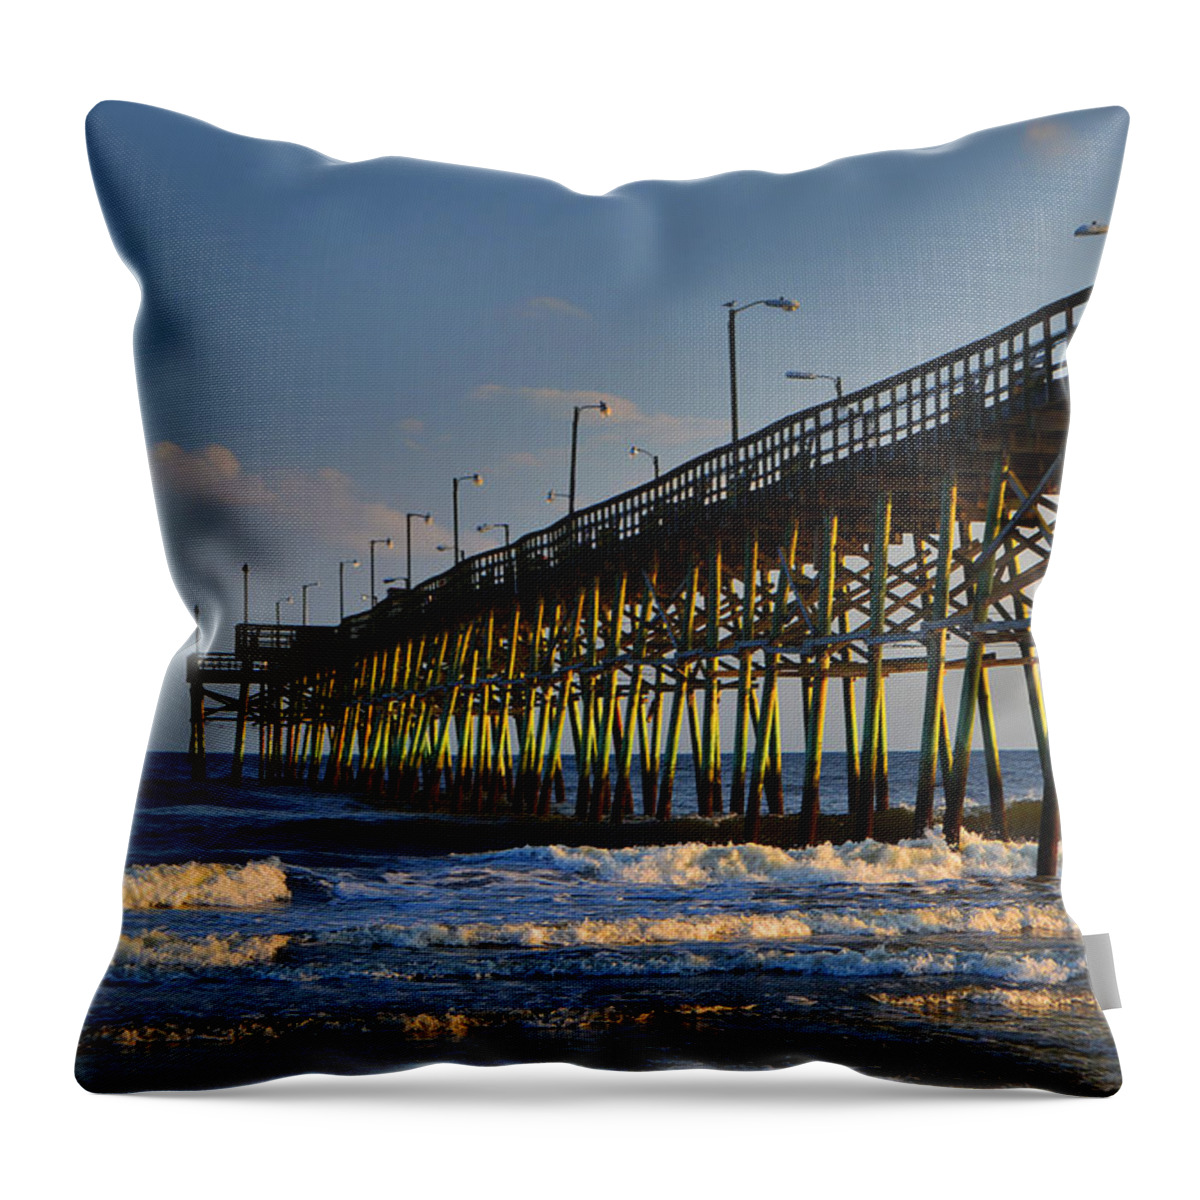 Pier Throw Pillow featuring the photograph Oak Island Pier 2015 by Amy Lucid